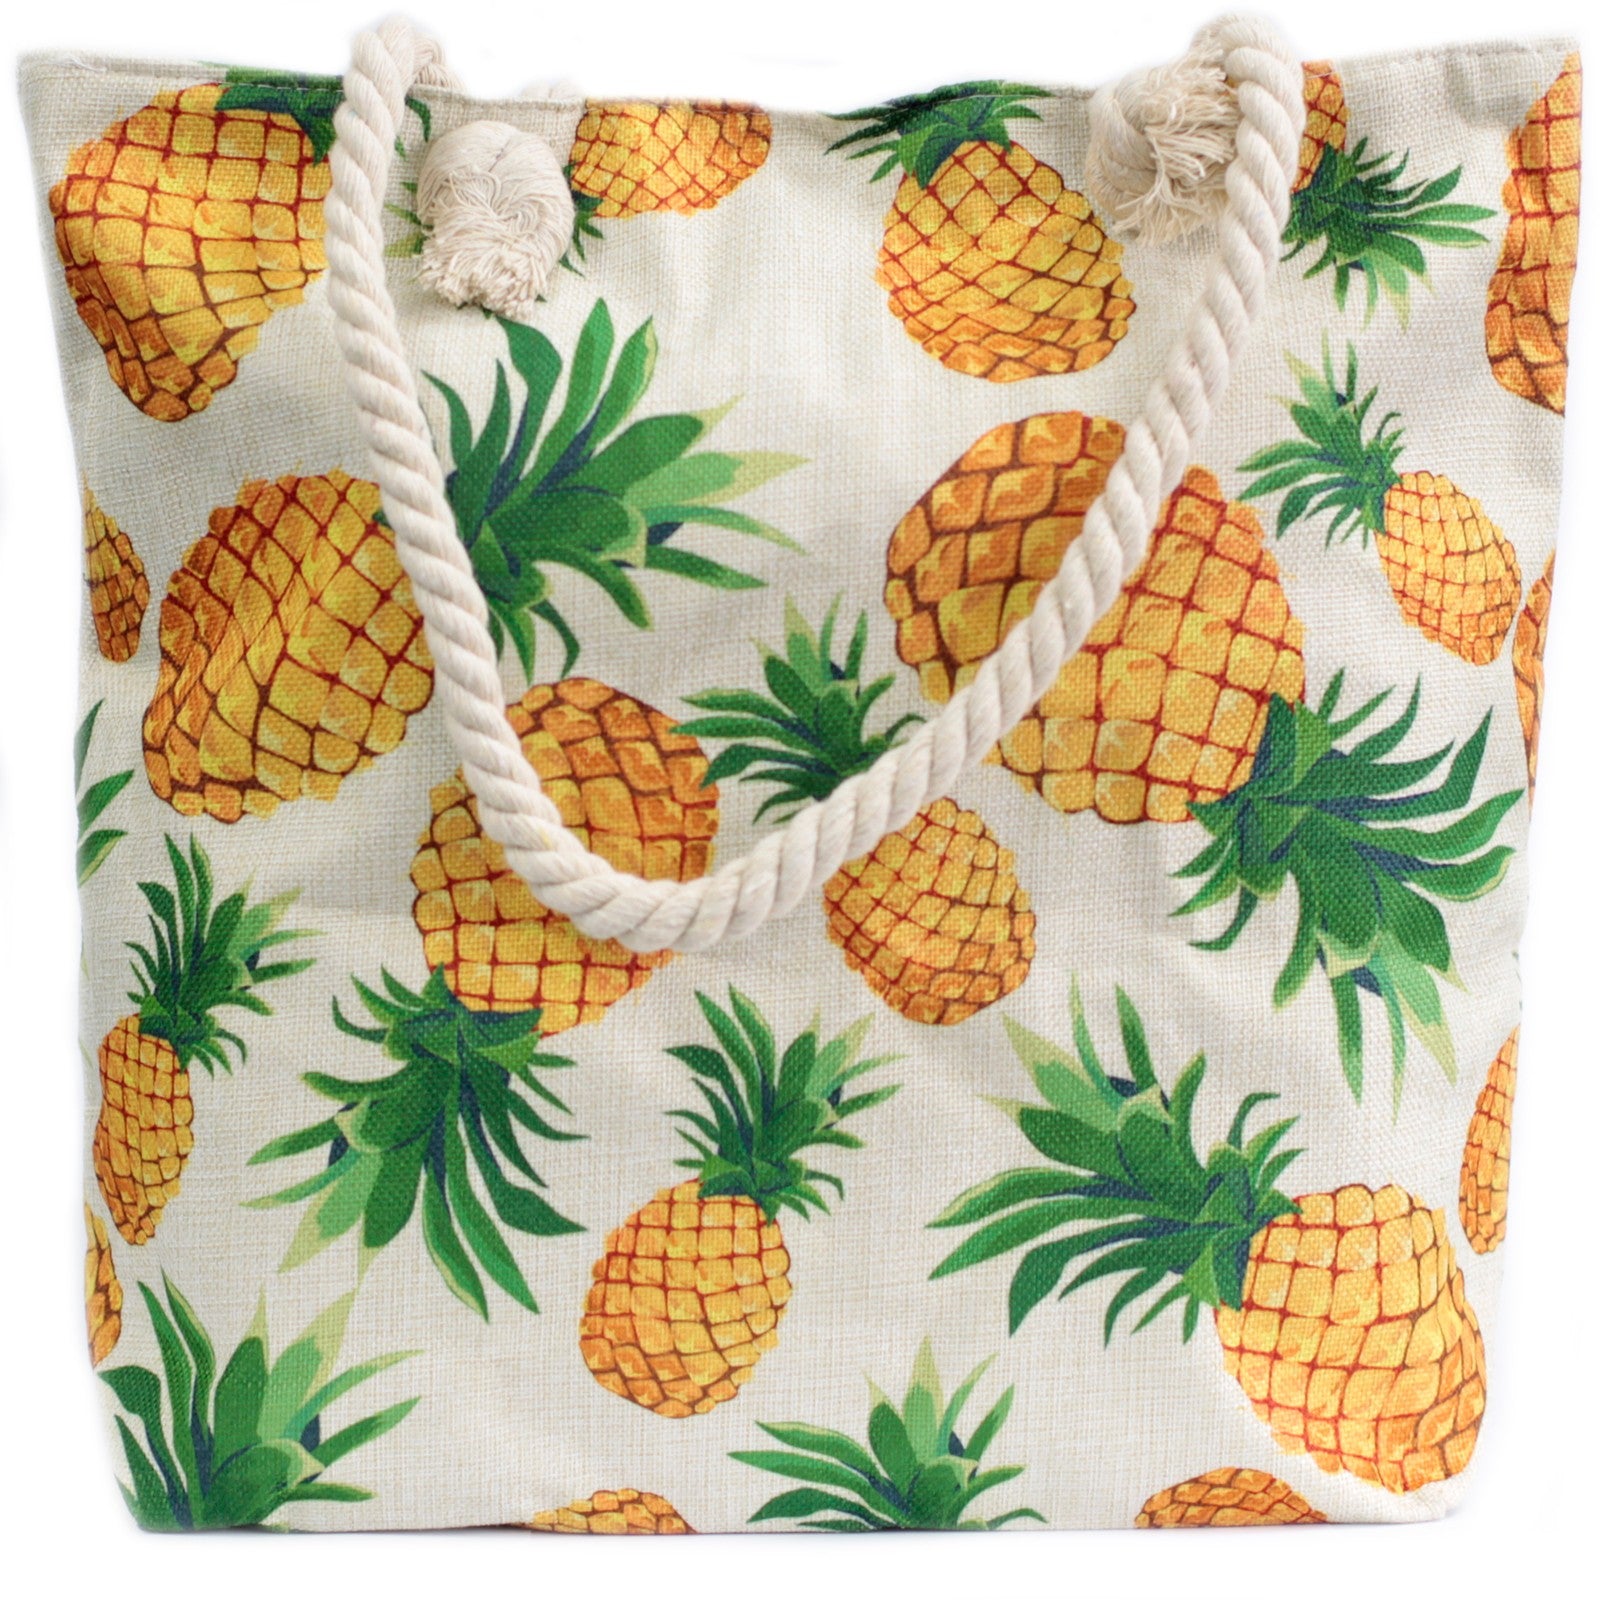 View Rope Handle Bag Pineapples information